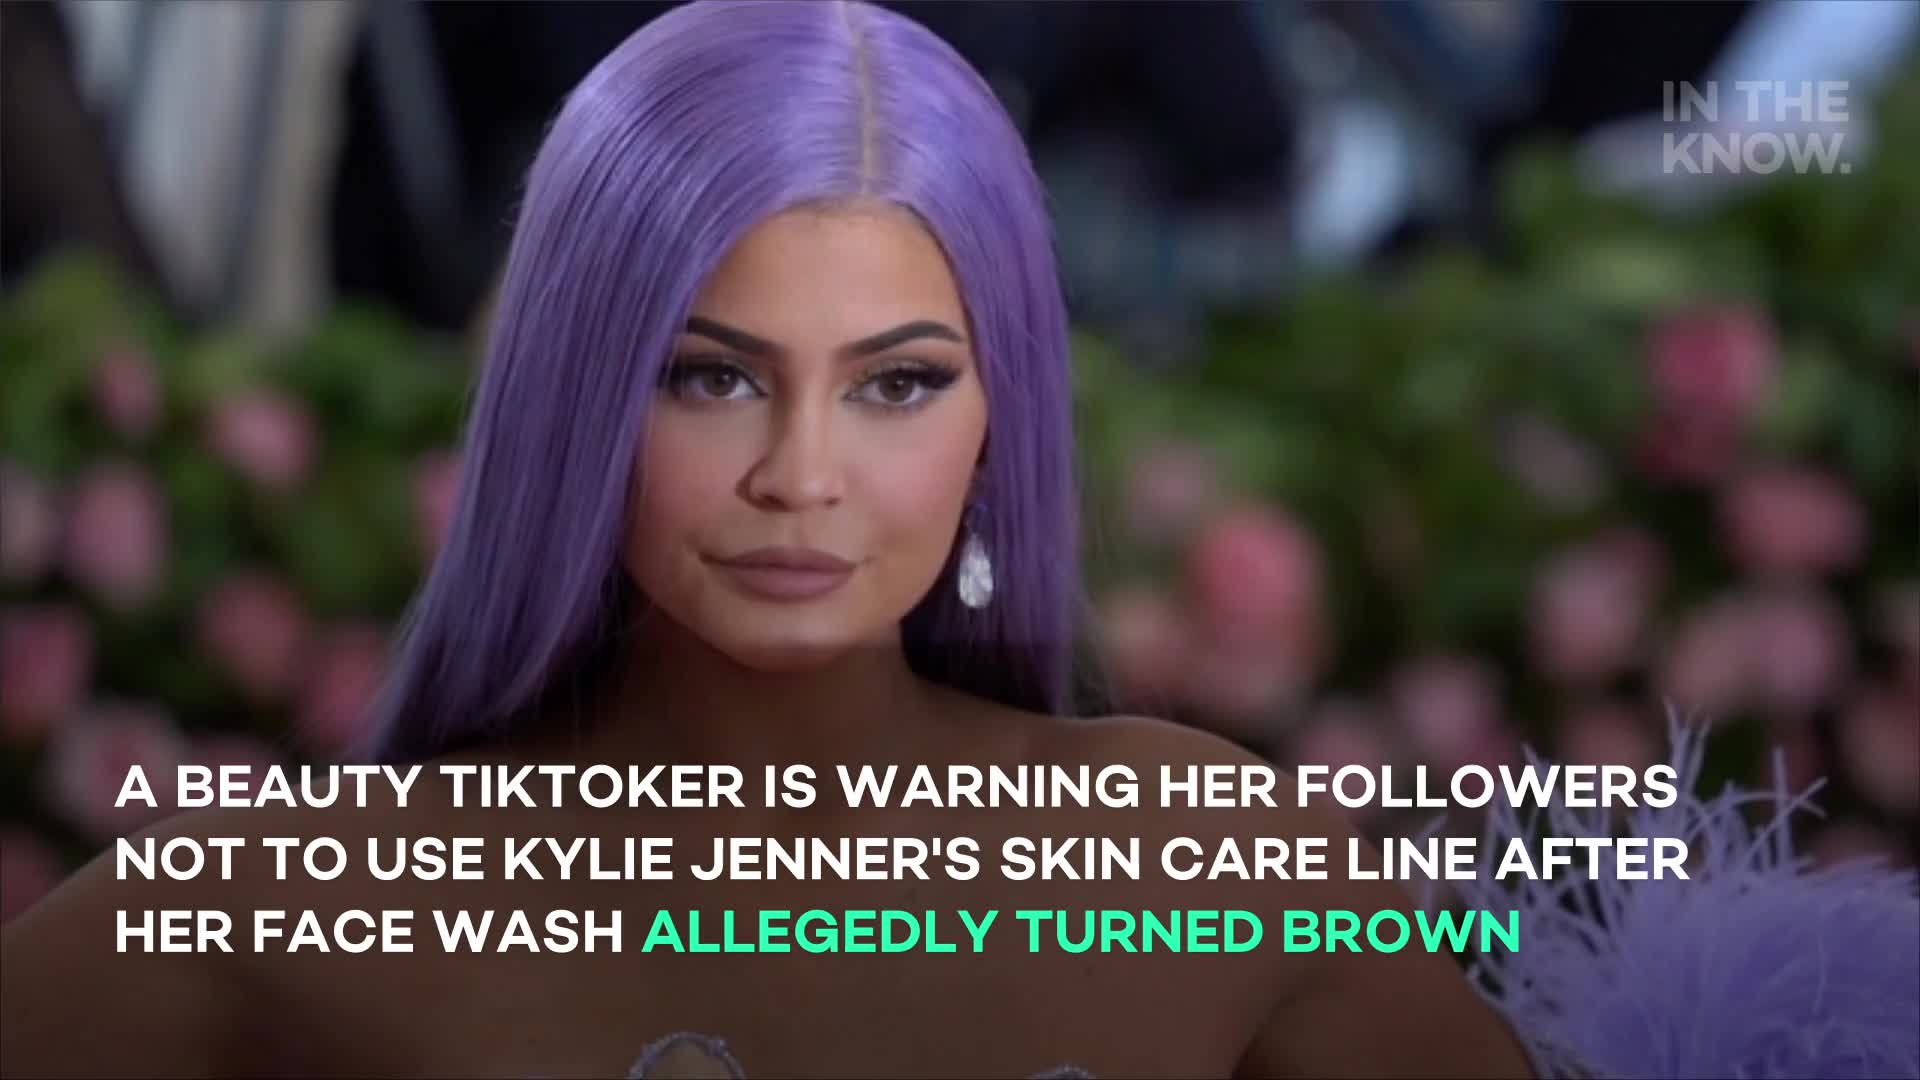 Kylie Jenner is facing backlash for photos in an Italy lab